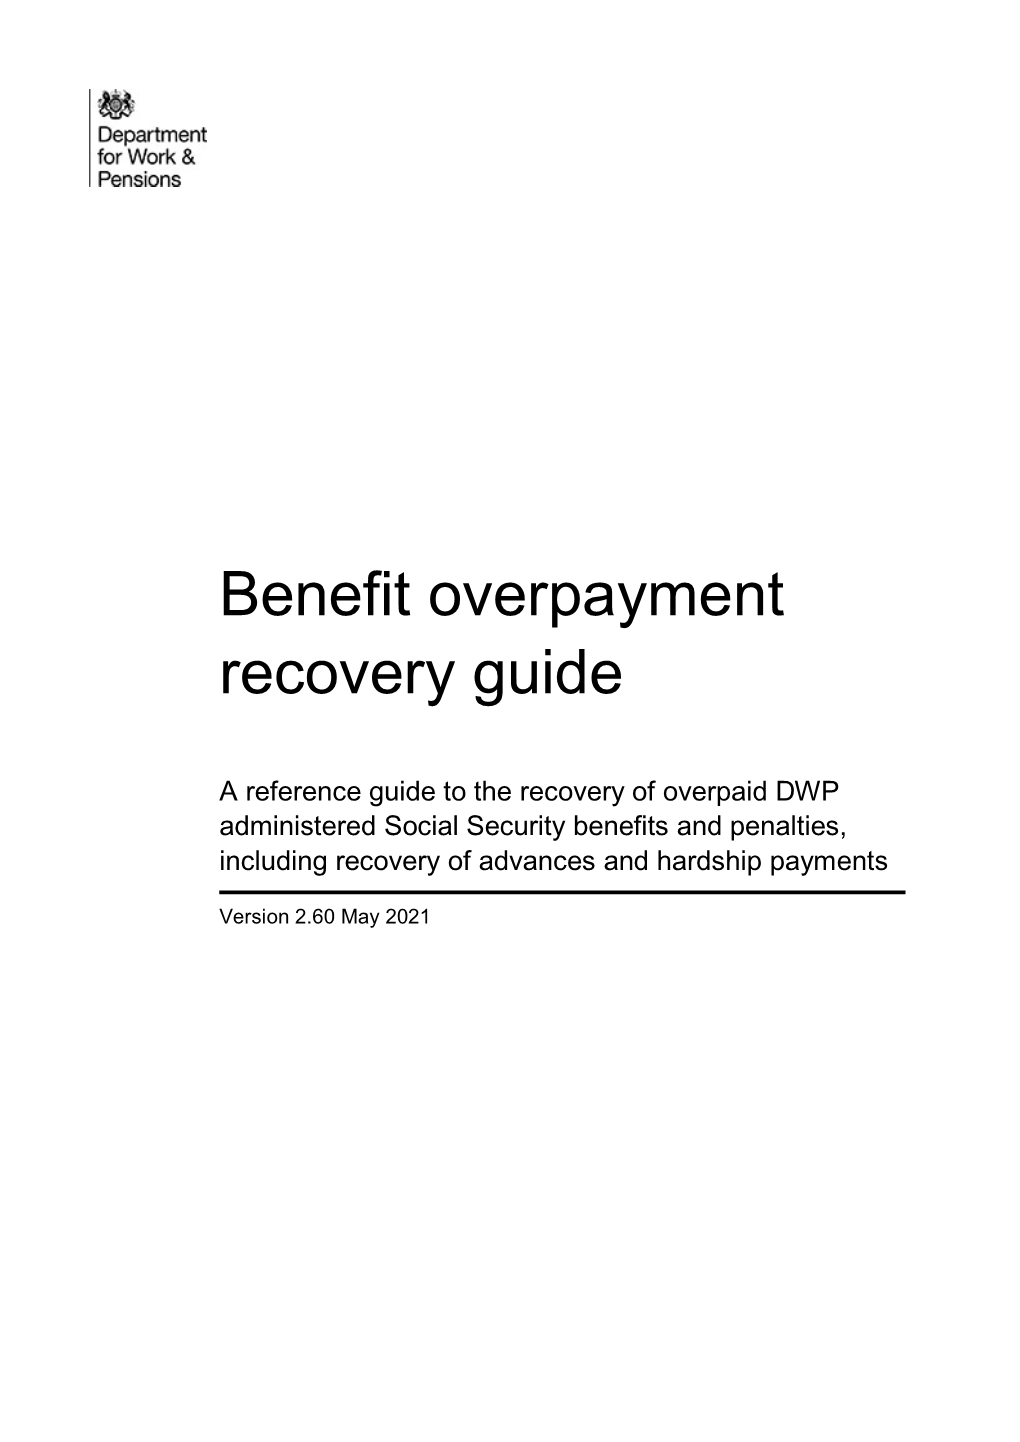 Benefit Overpayment Recovery Guide